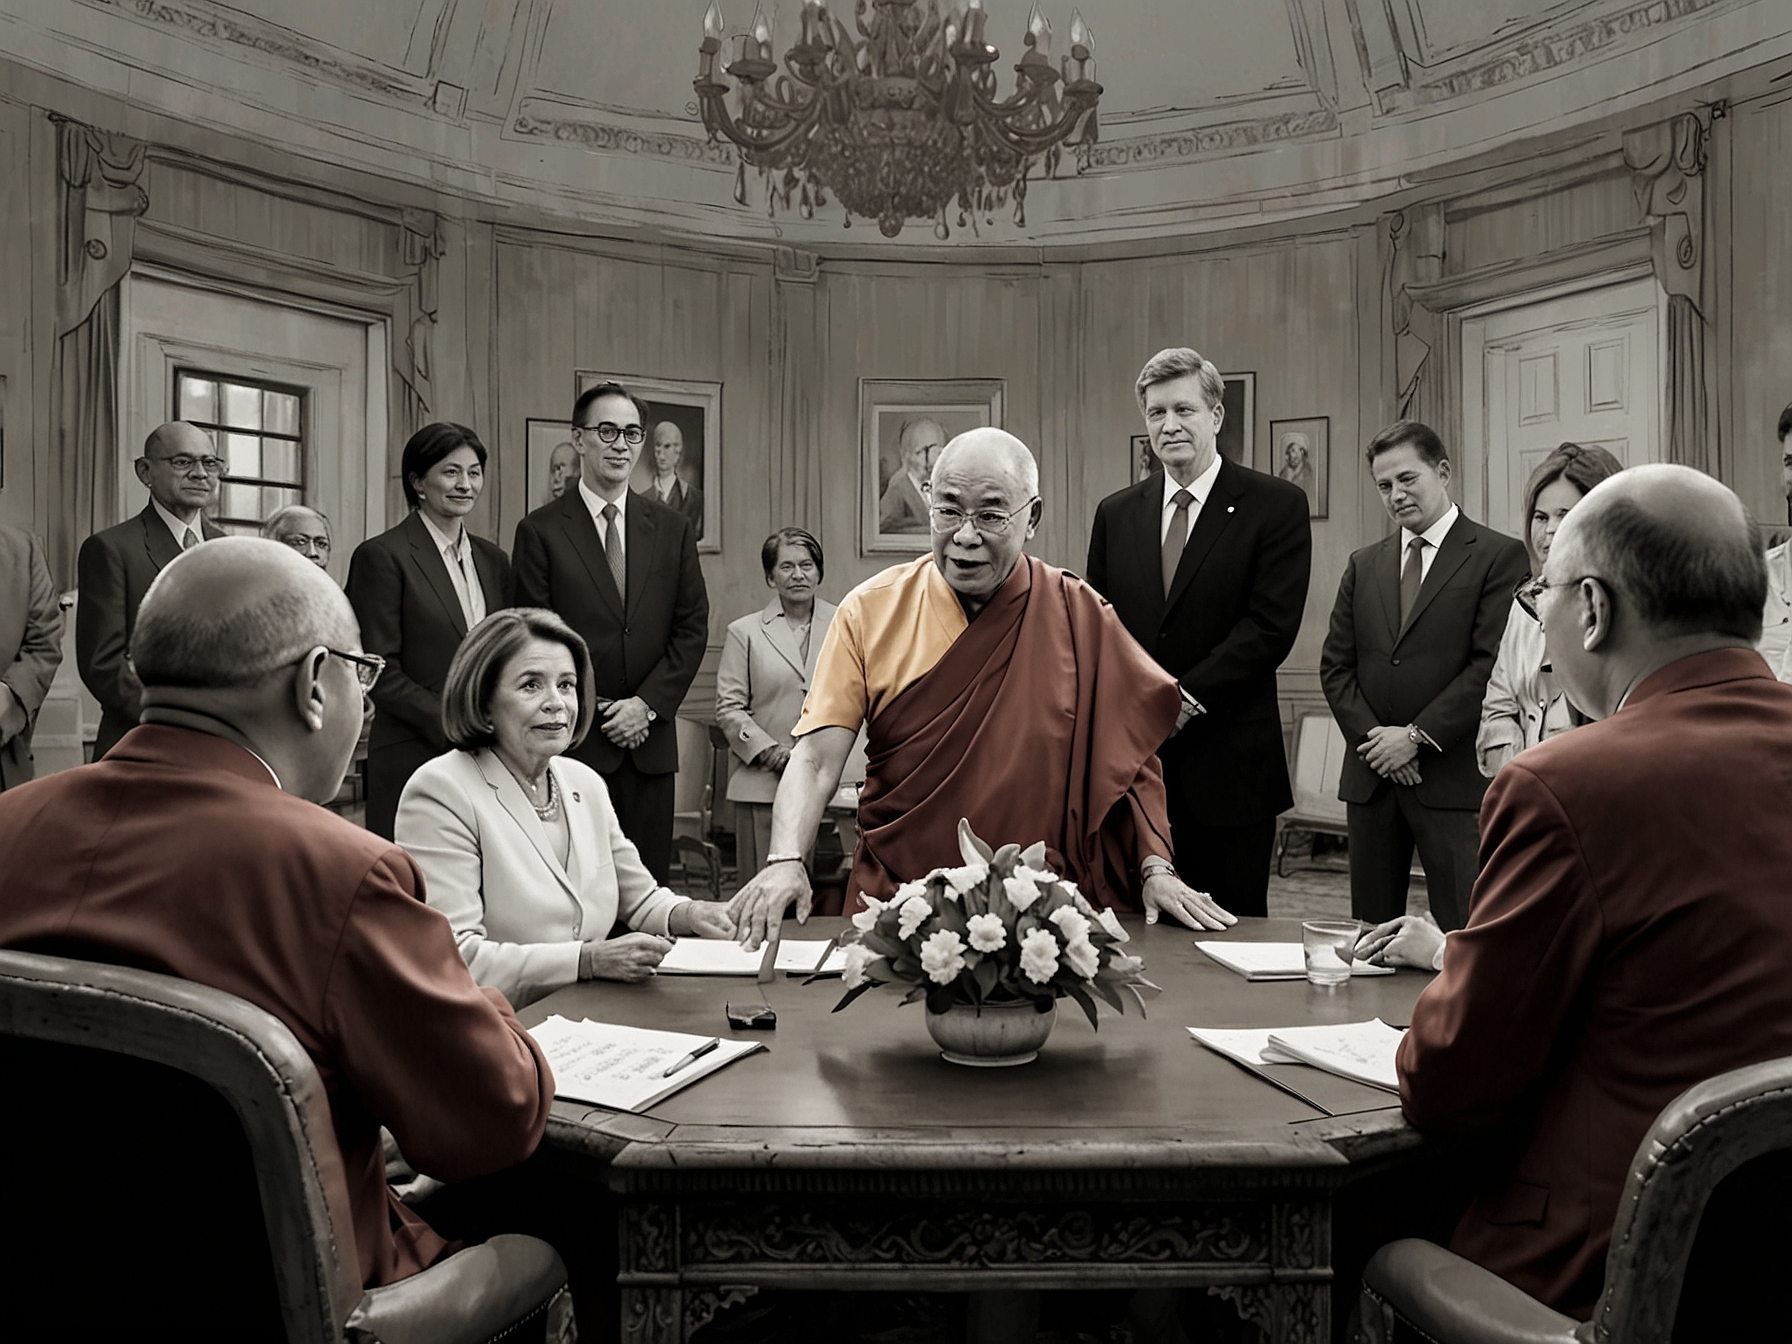 Nancy Pelosi with the Congressional delegation and the Dalai Lama in India, highlighting their discussion on human rights and US support for Tibetan autonomy amid geopolitical tensions.